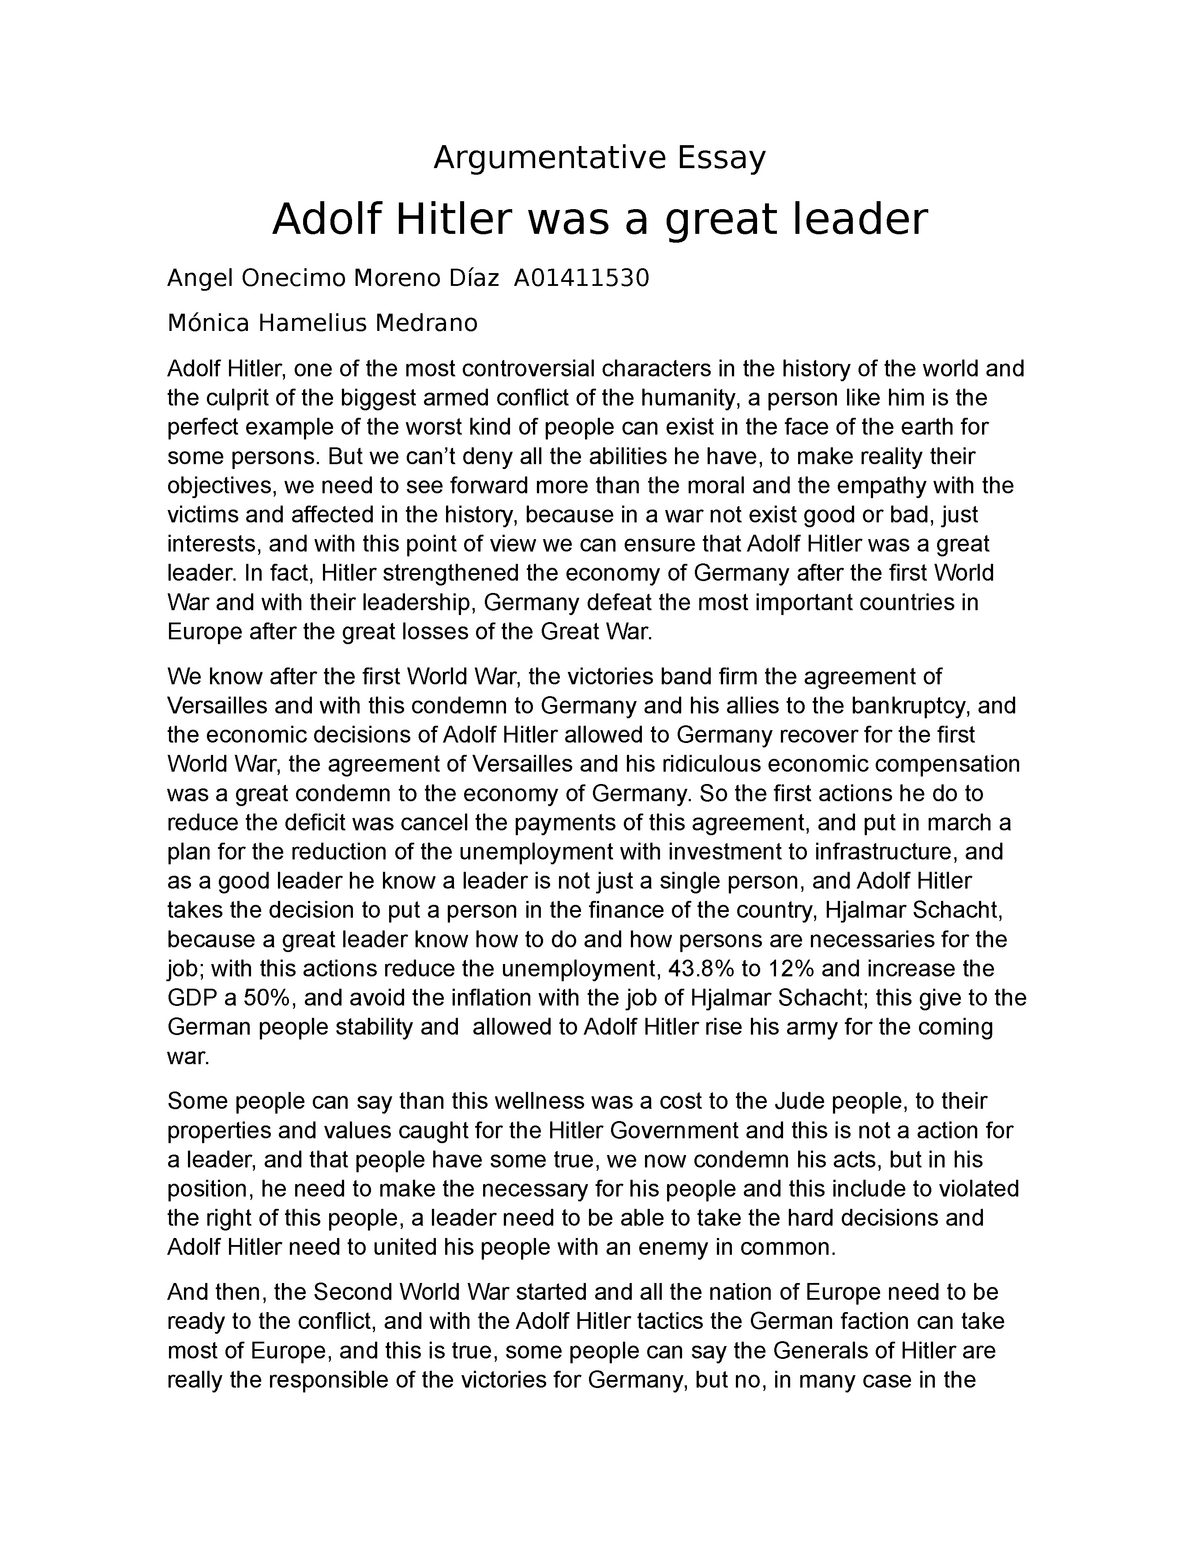 history essay about adolf hitler